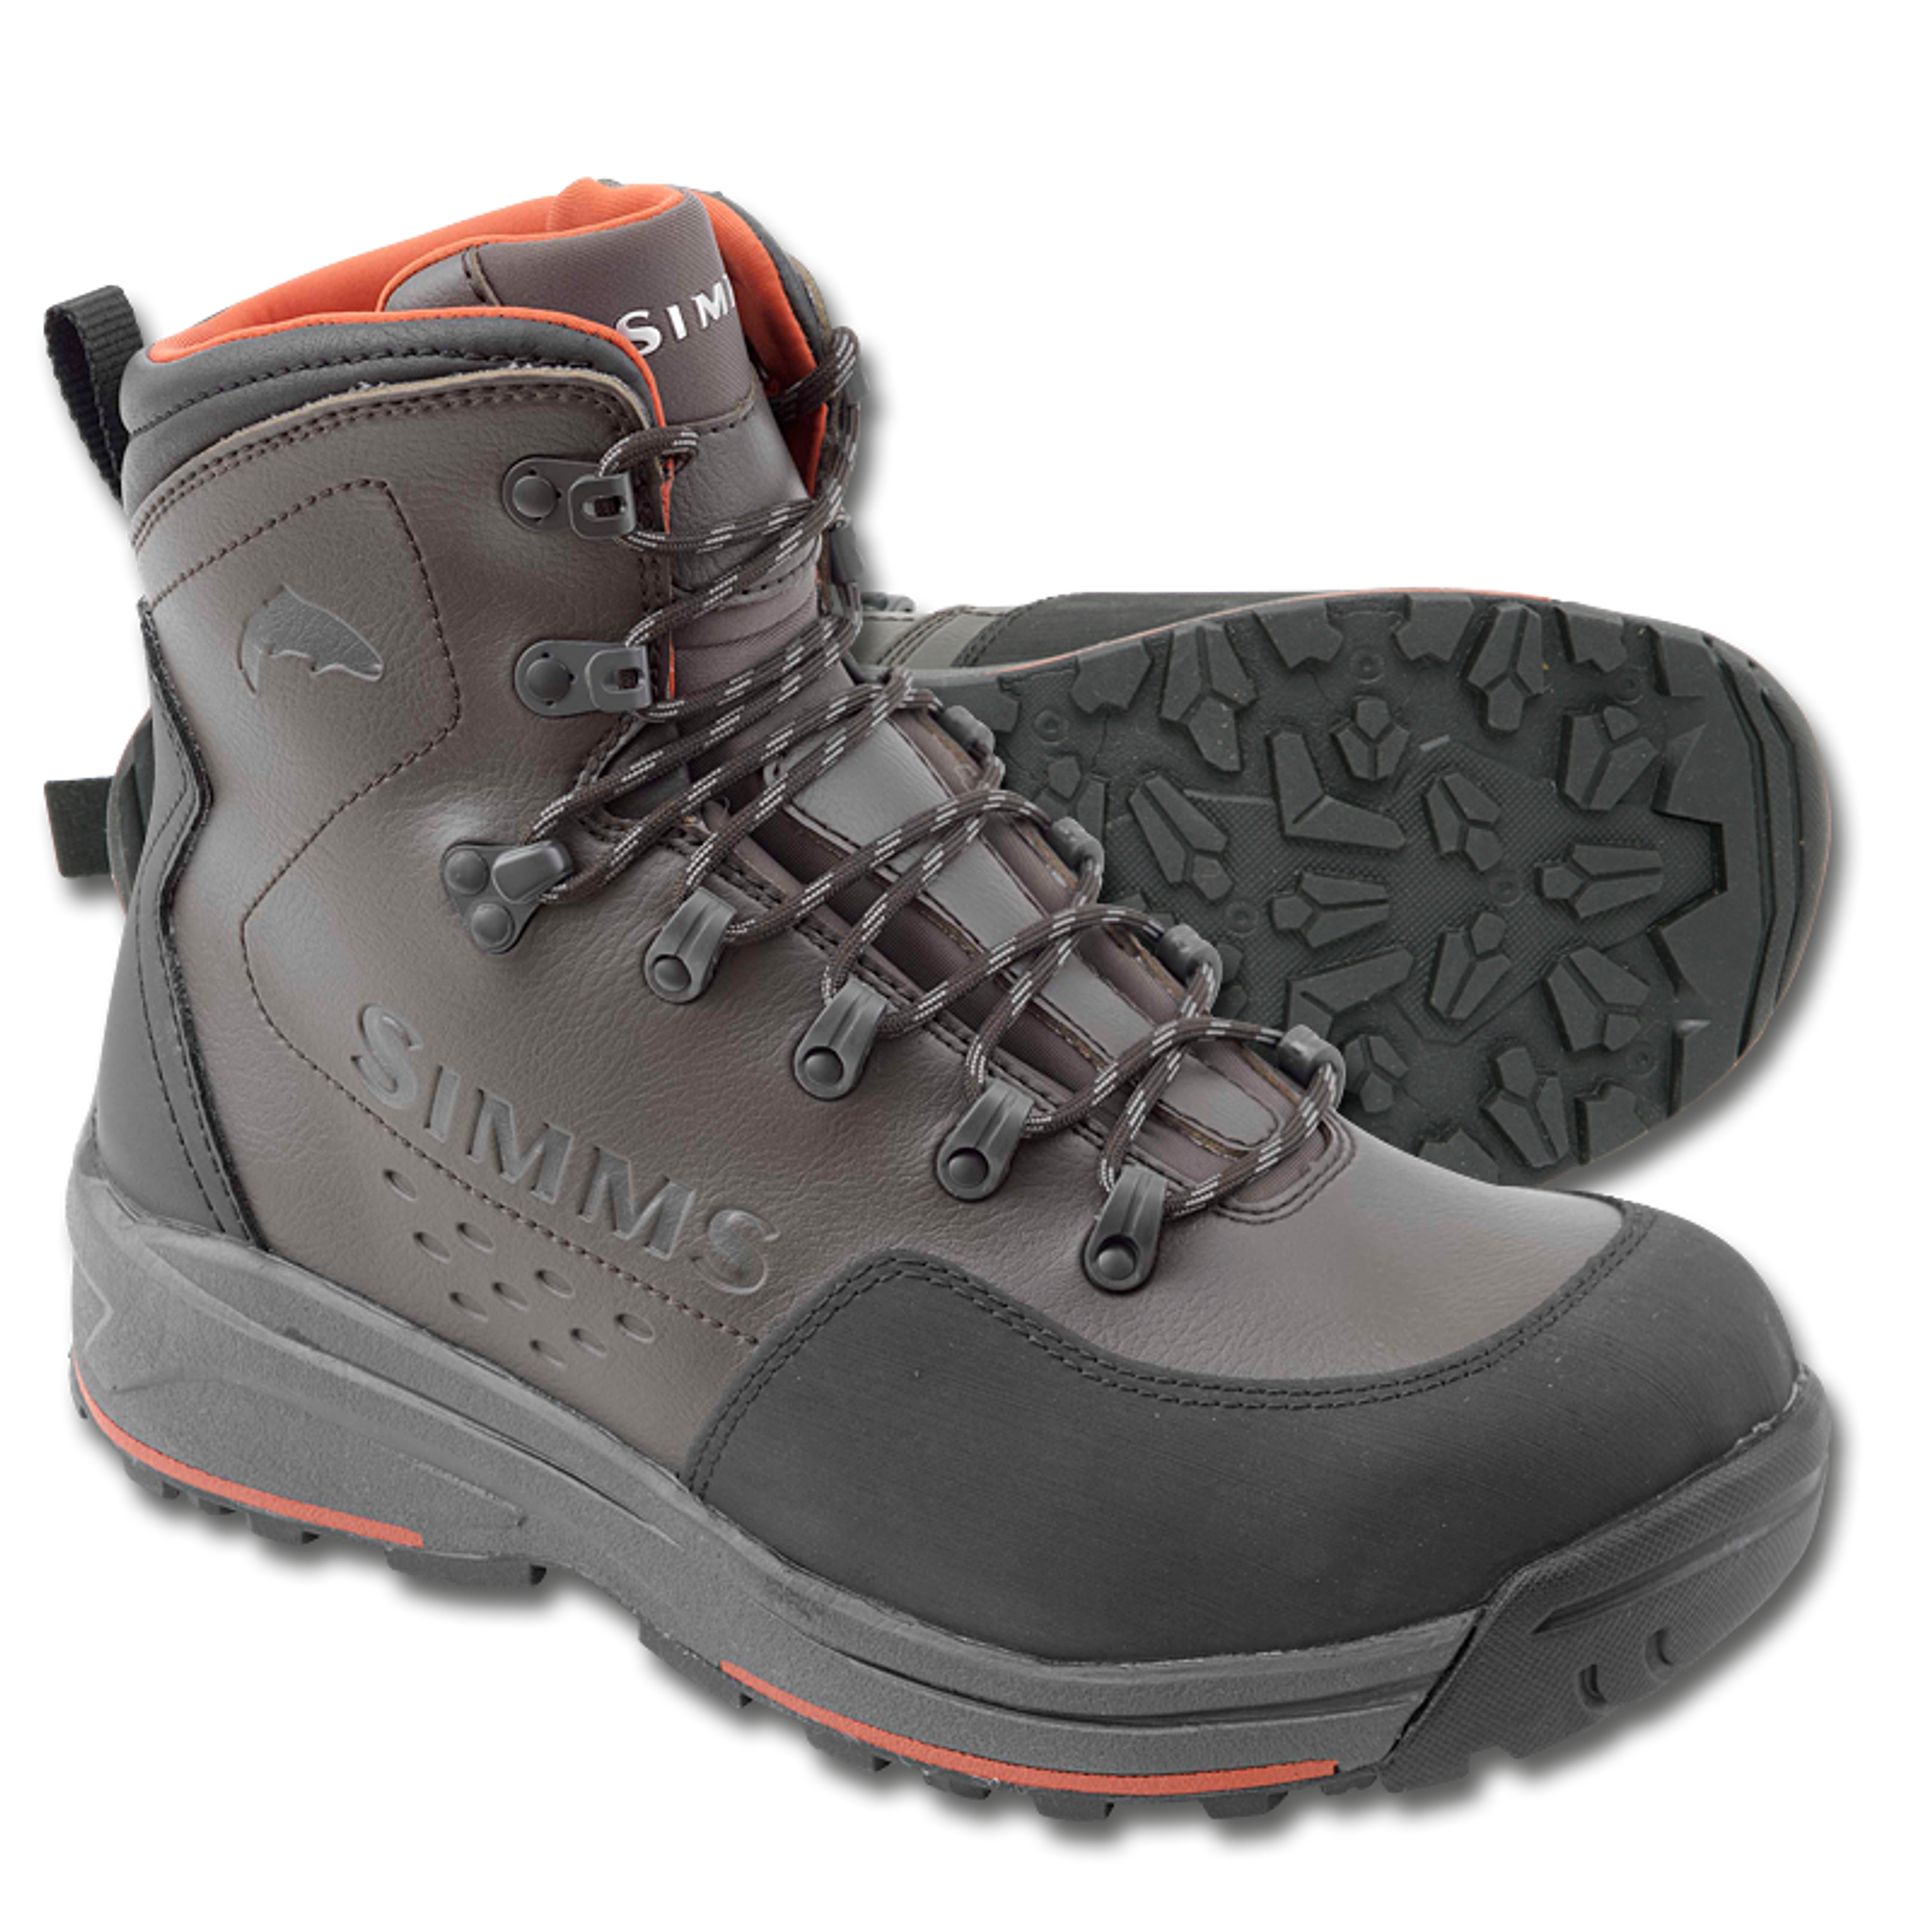 Freestone Wading Boots - Simms - The 